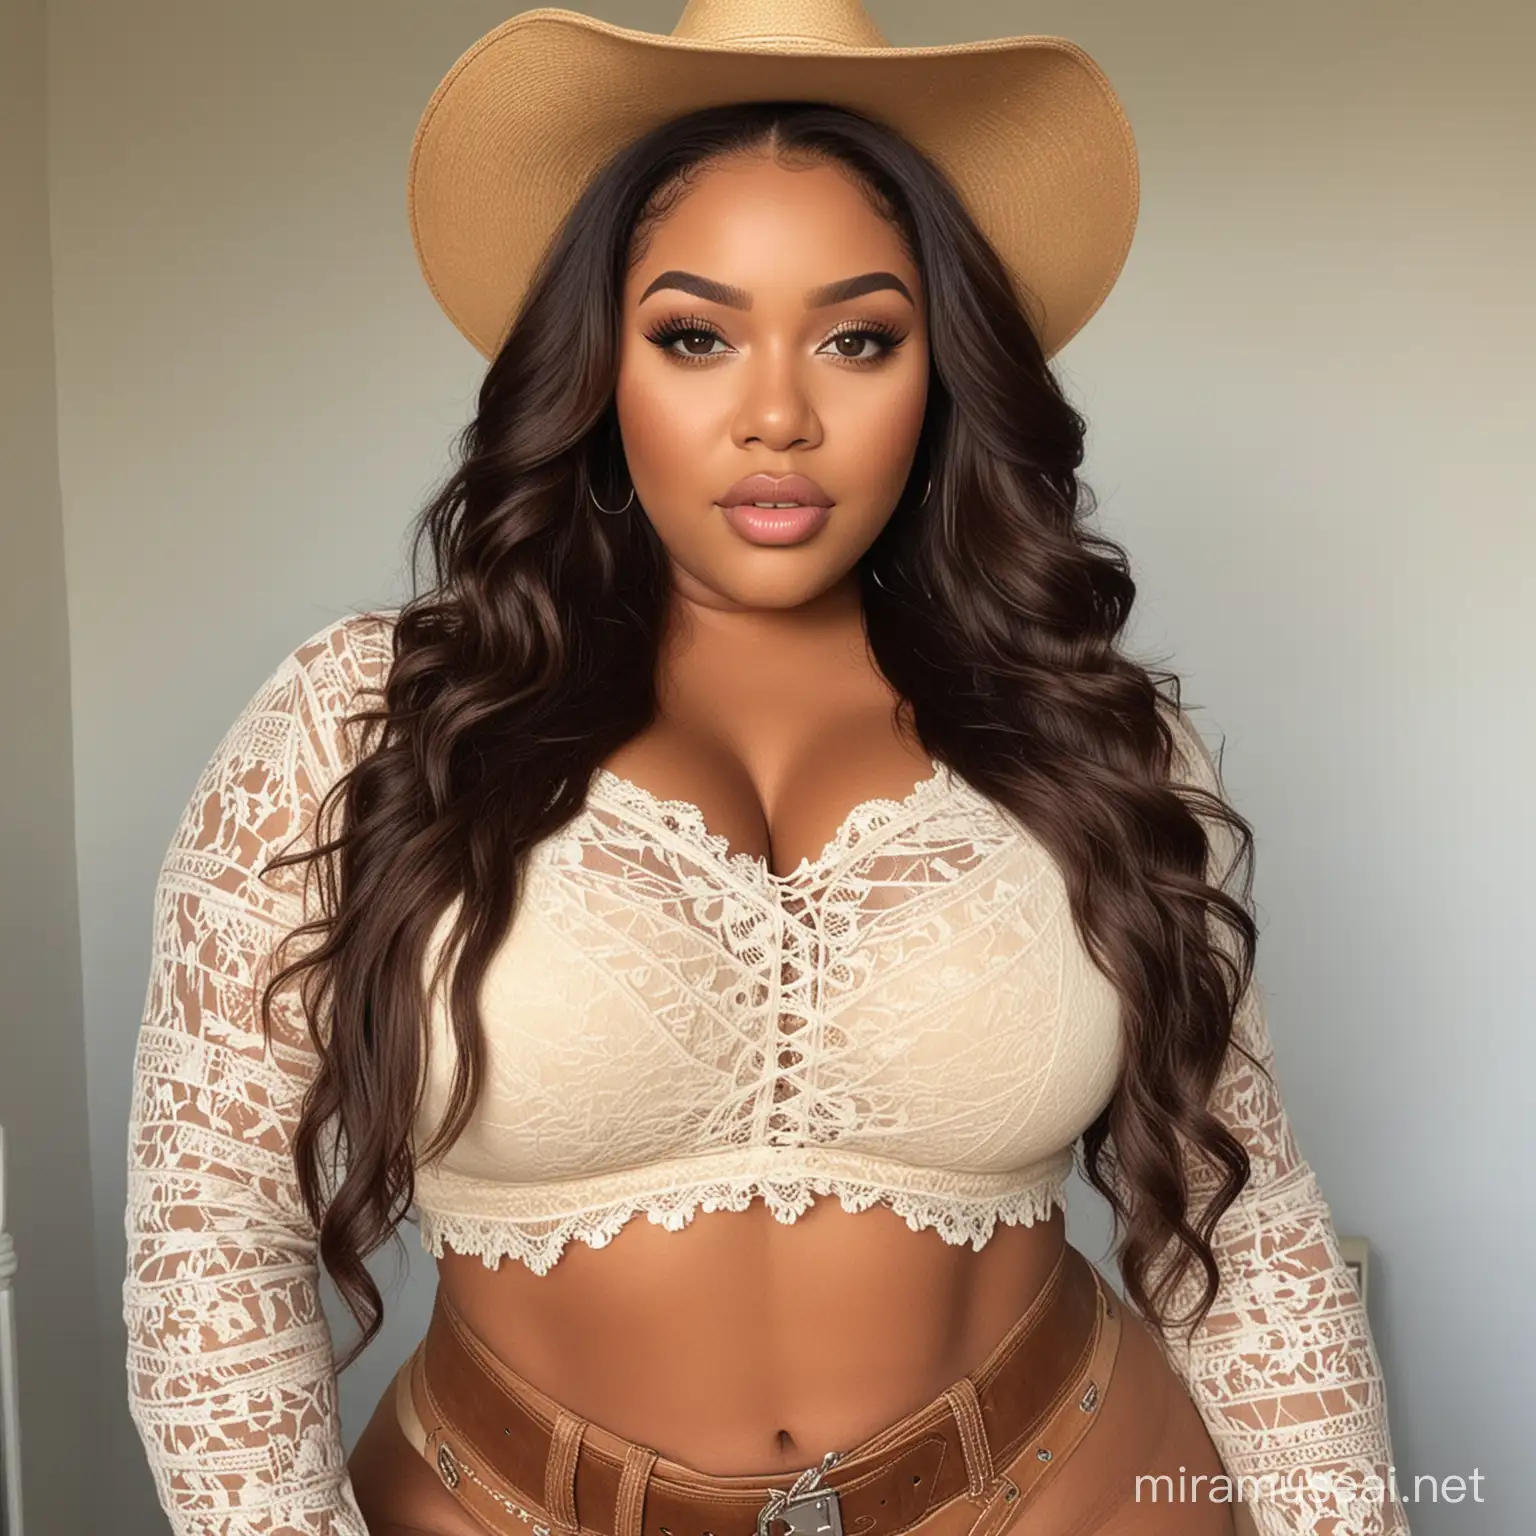 Image prompt/: generate pictures full body of a light skinned south african curvy, thick, plus size girl that looks like me, with a straight brown hd lace front weave, cowgirl outfit